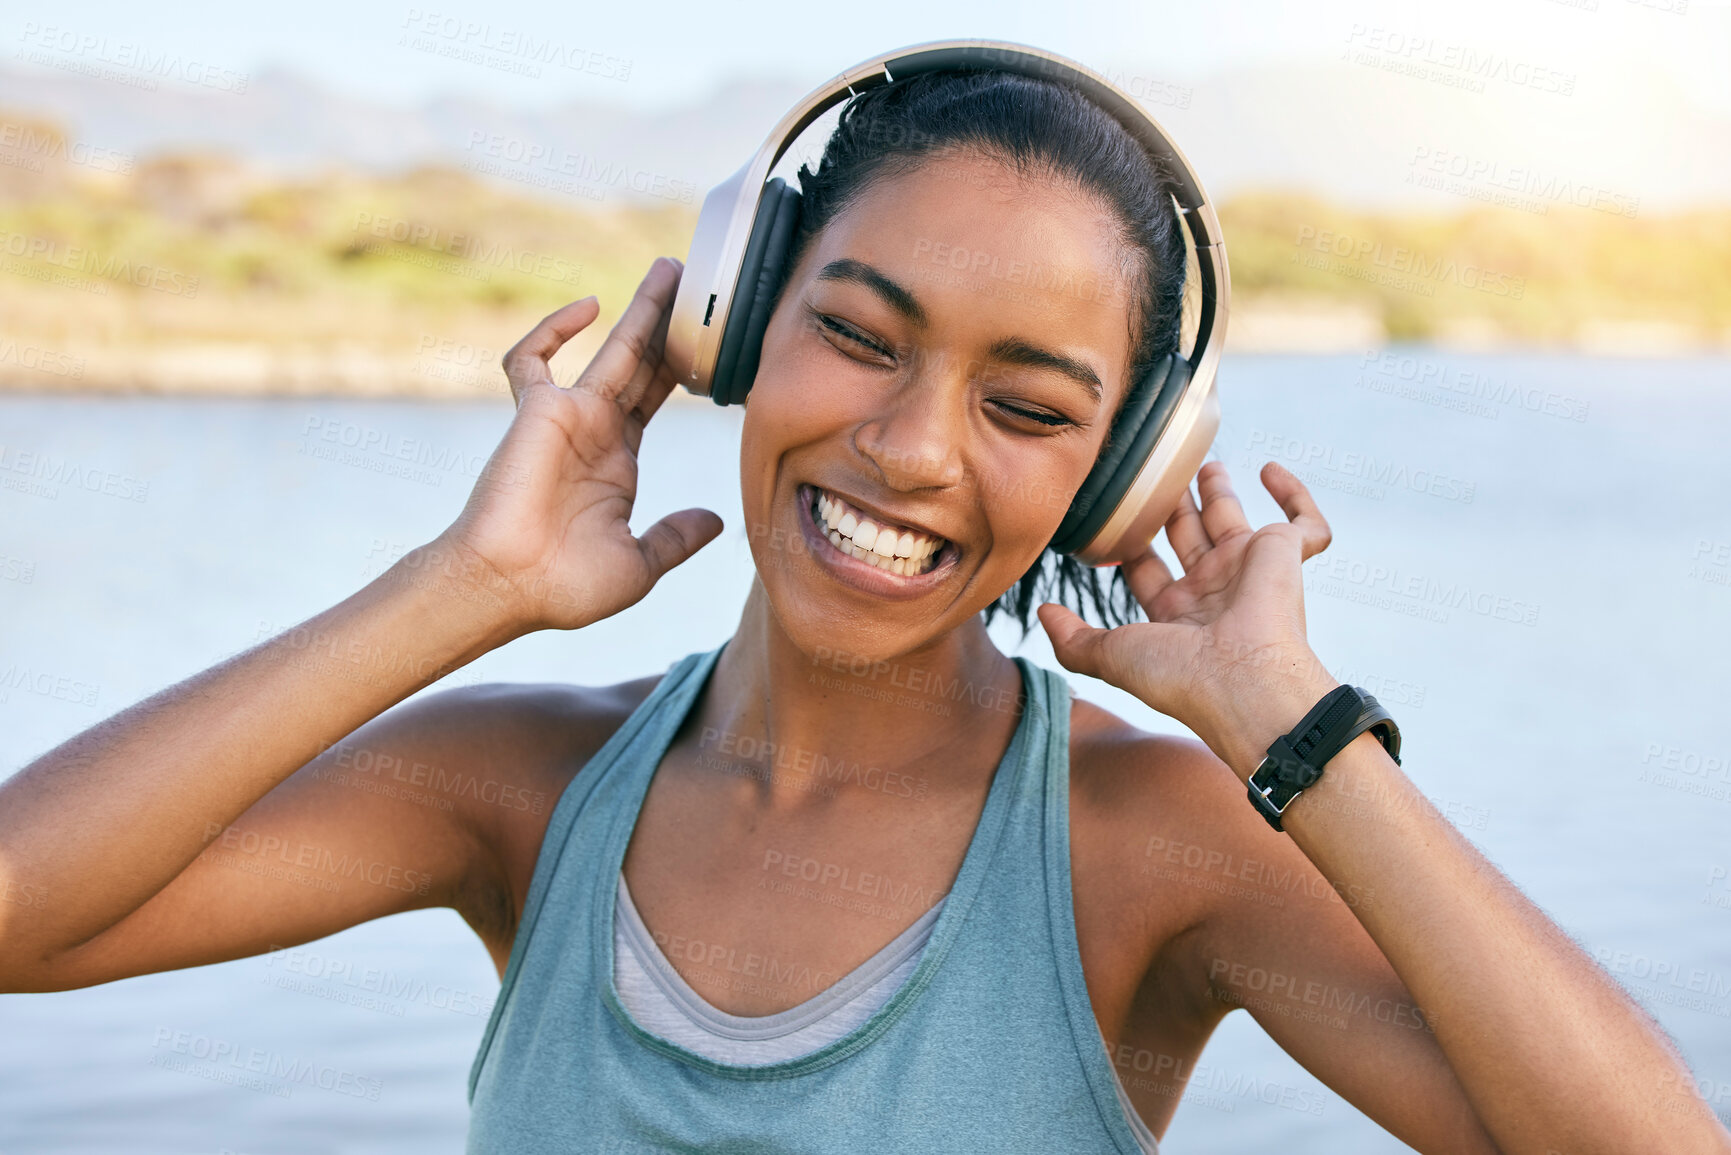 Buy stock photo Excited woman smiling and listening to music with water in the background. Happy young female enjoying tunes on her online streaming playlist while outdoors. Using wireless headphones play songs